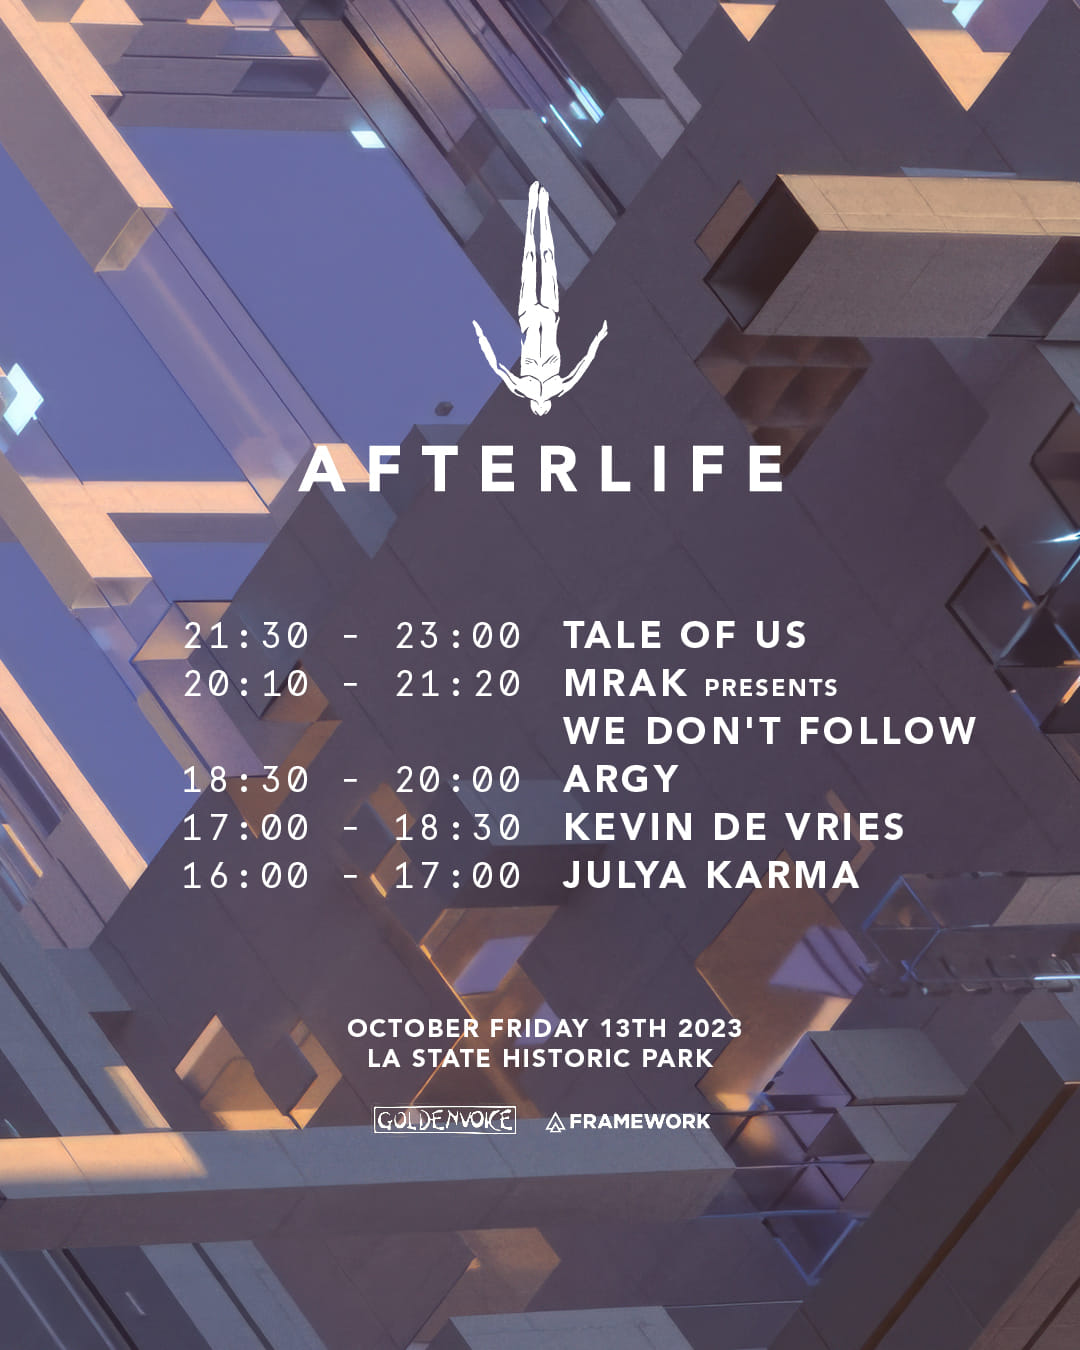 GDE on X: 🚨 HEADS UP - Set Times for AFTERLIFE Los Angeles Friday are  here 3:30PM - Doors 4PM - Julya Karma 5PM - 6:30PM - Keven De Vries 6:30PM 